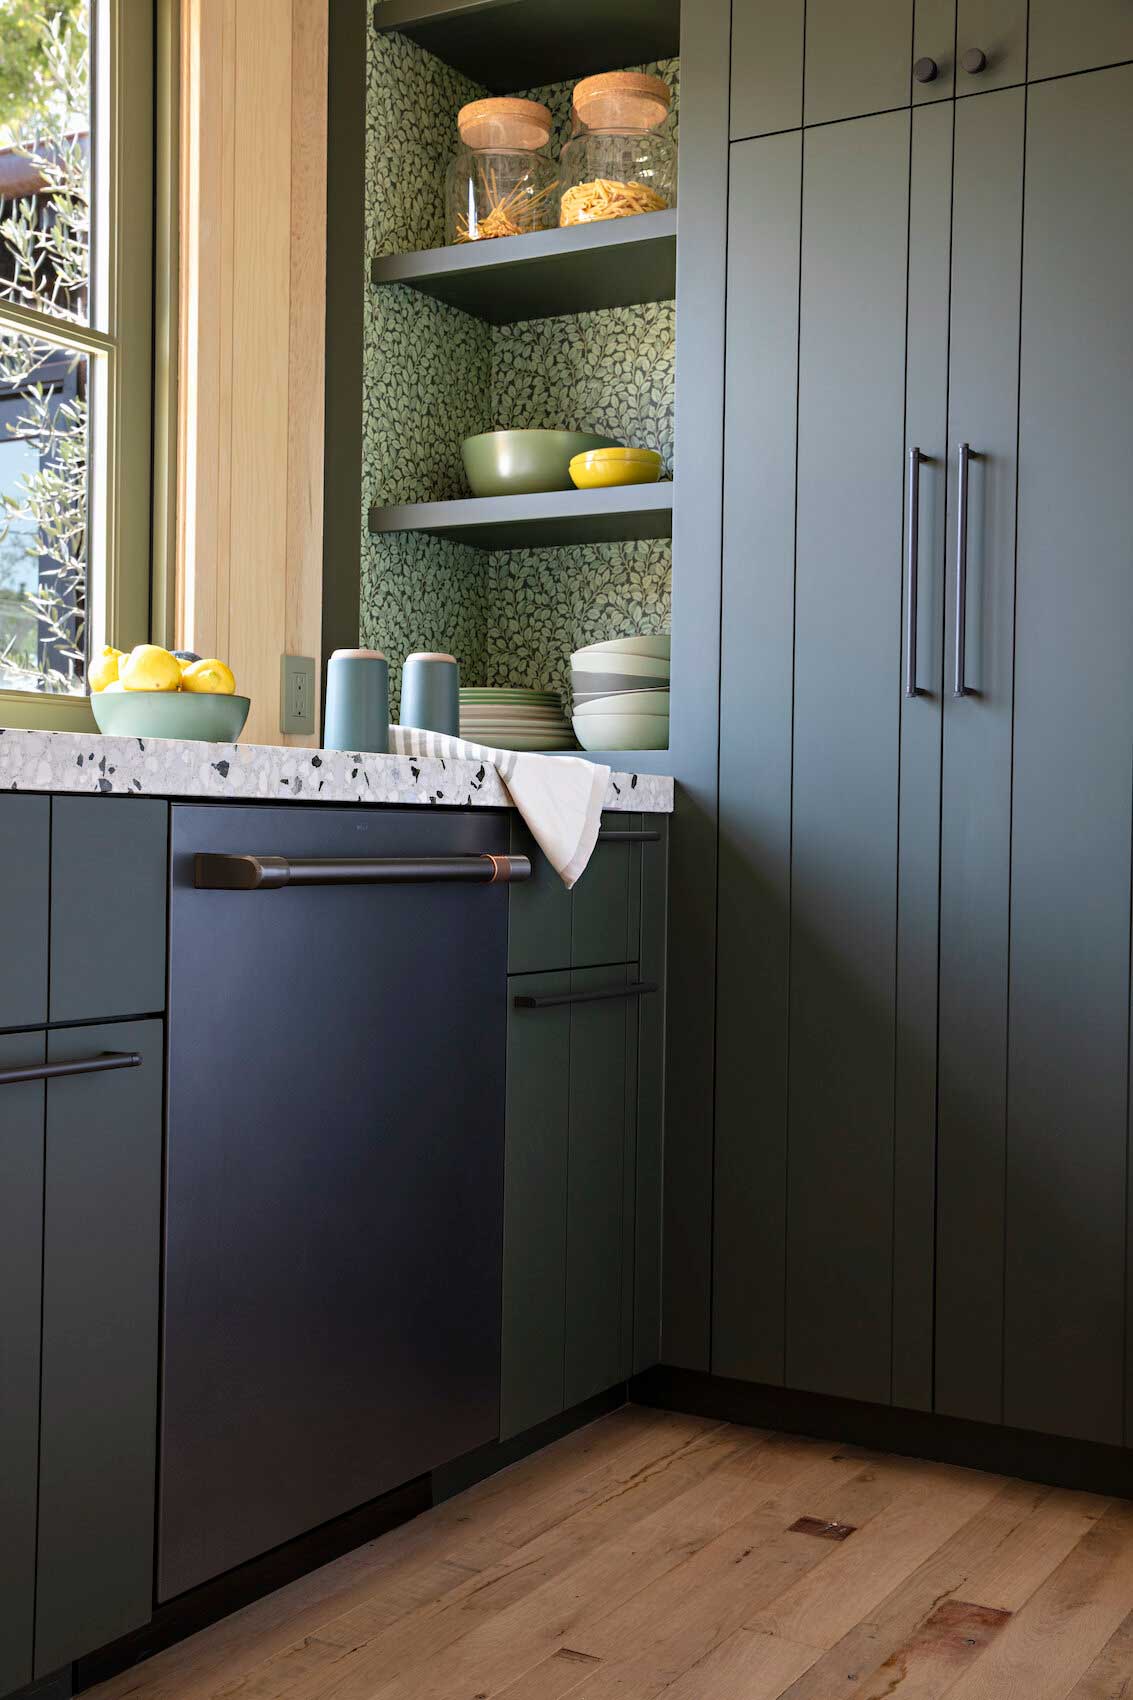 kitchen vignette with dark green cabinetry, green patterned wallpaper and terrazzo countertops